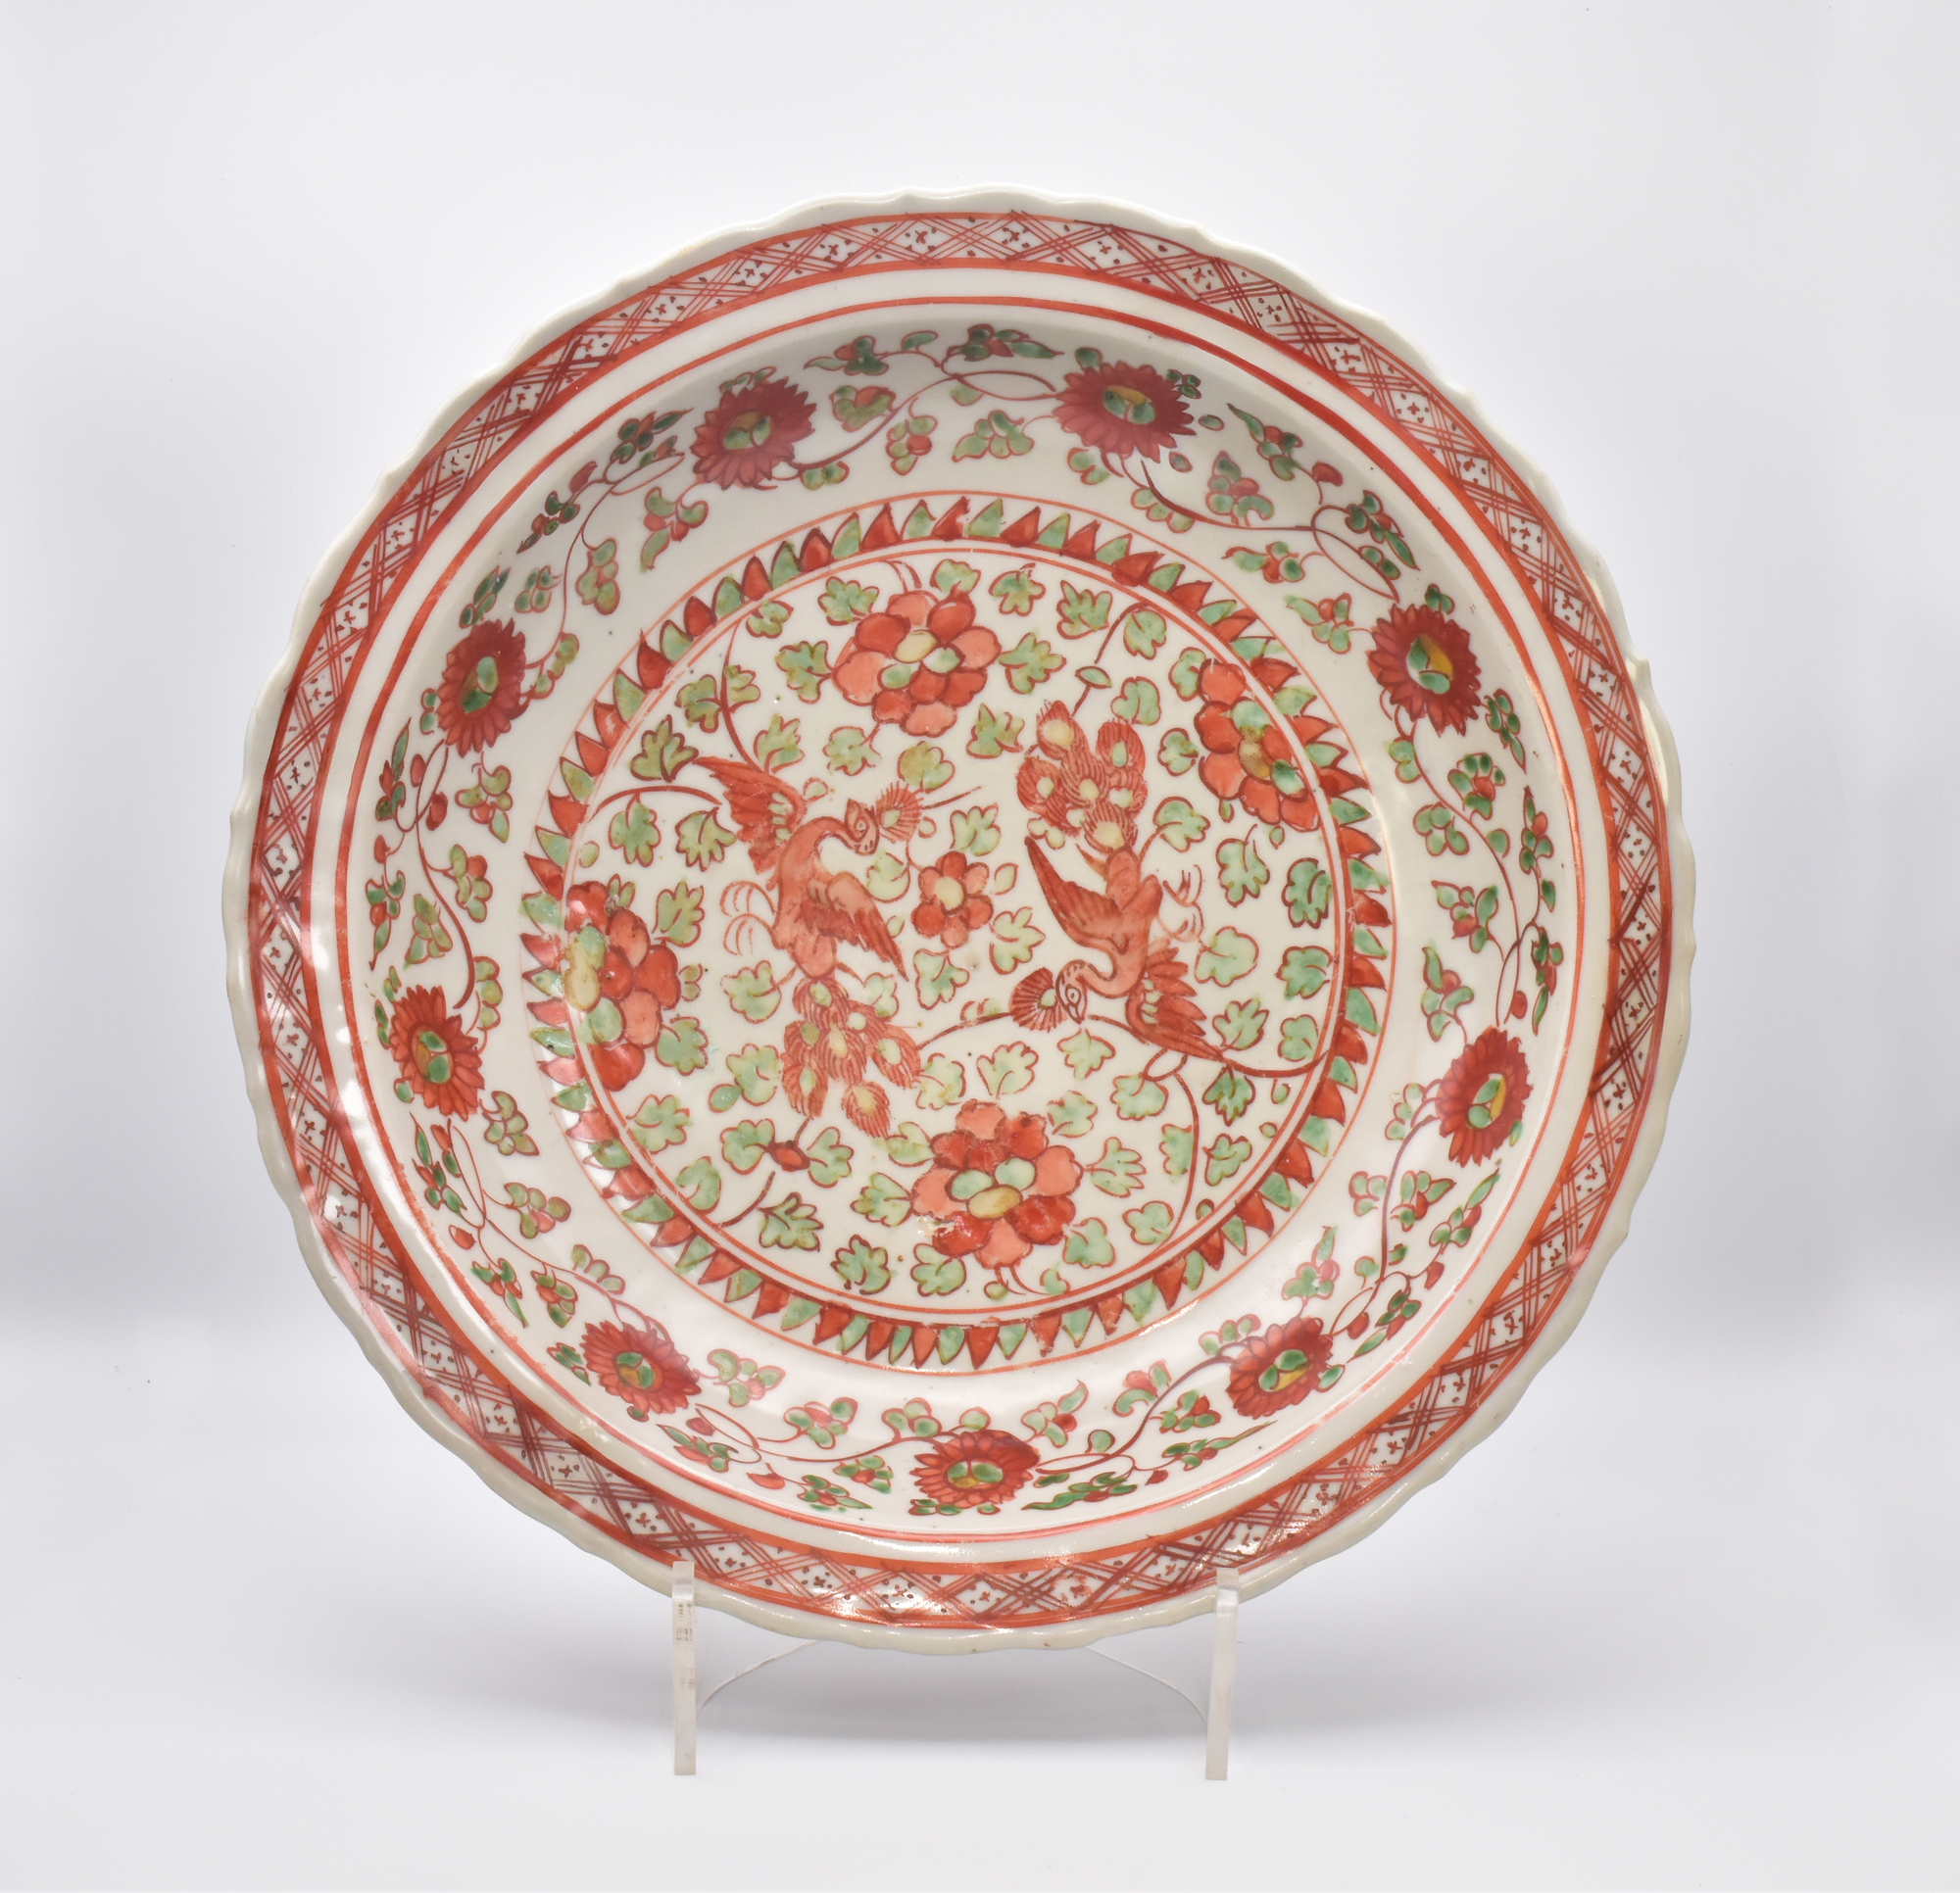 A CHINESE PORCELAIN IRON-RED ‘PEACOCK' DISH, LATE MING DYNASTY, 16TH CENTURY